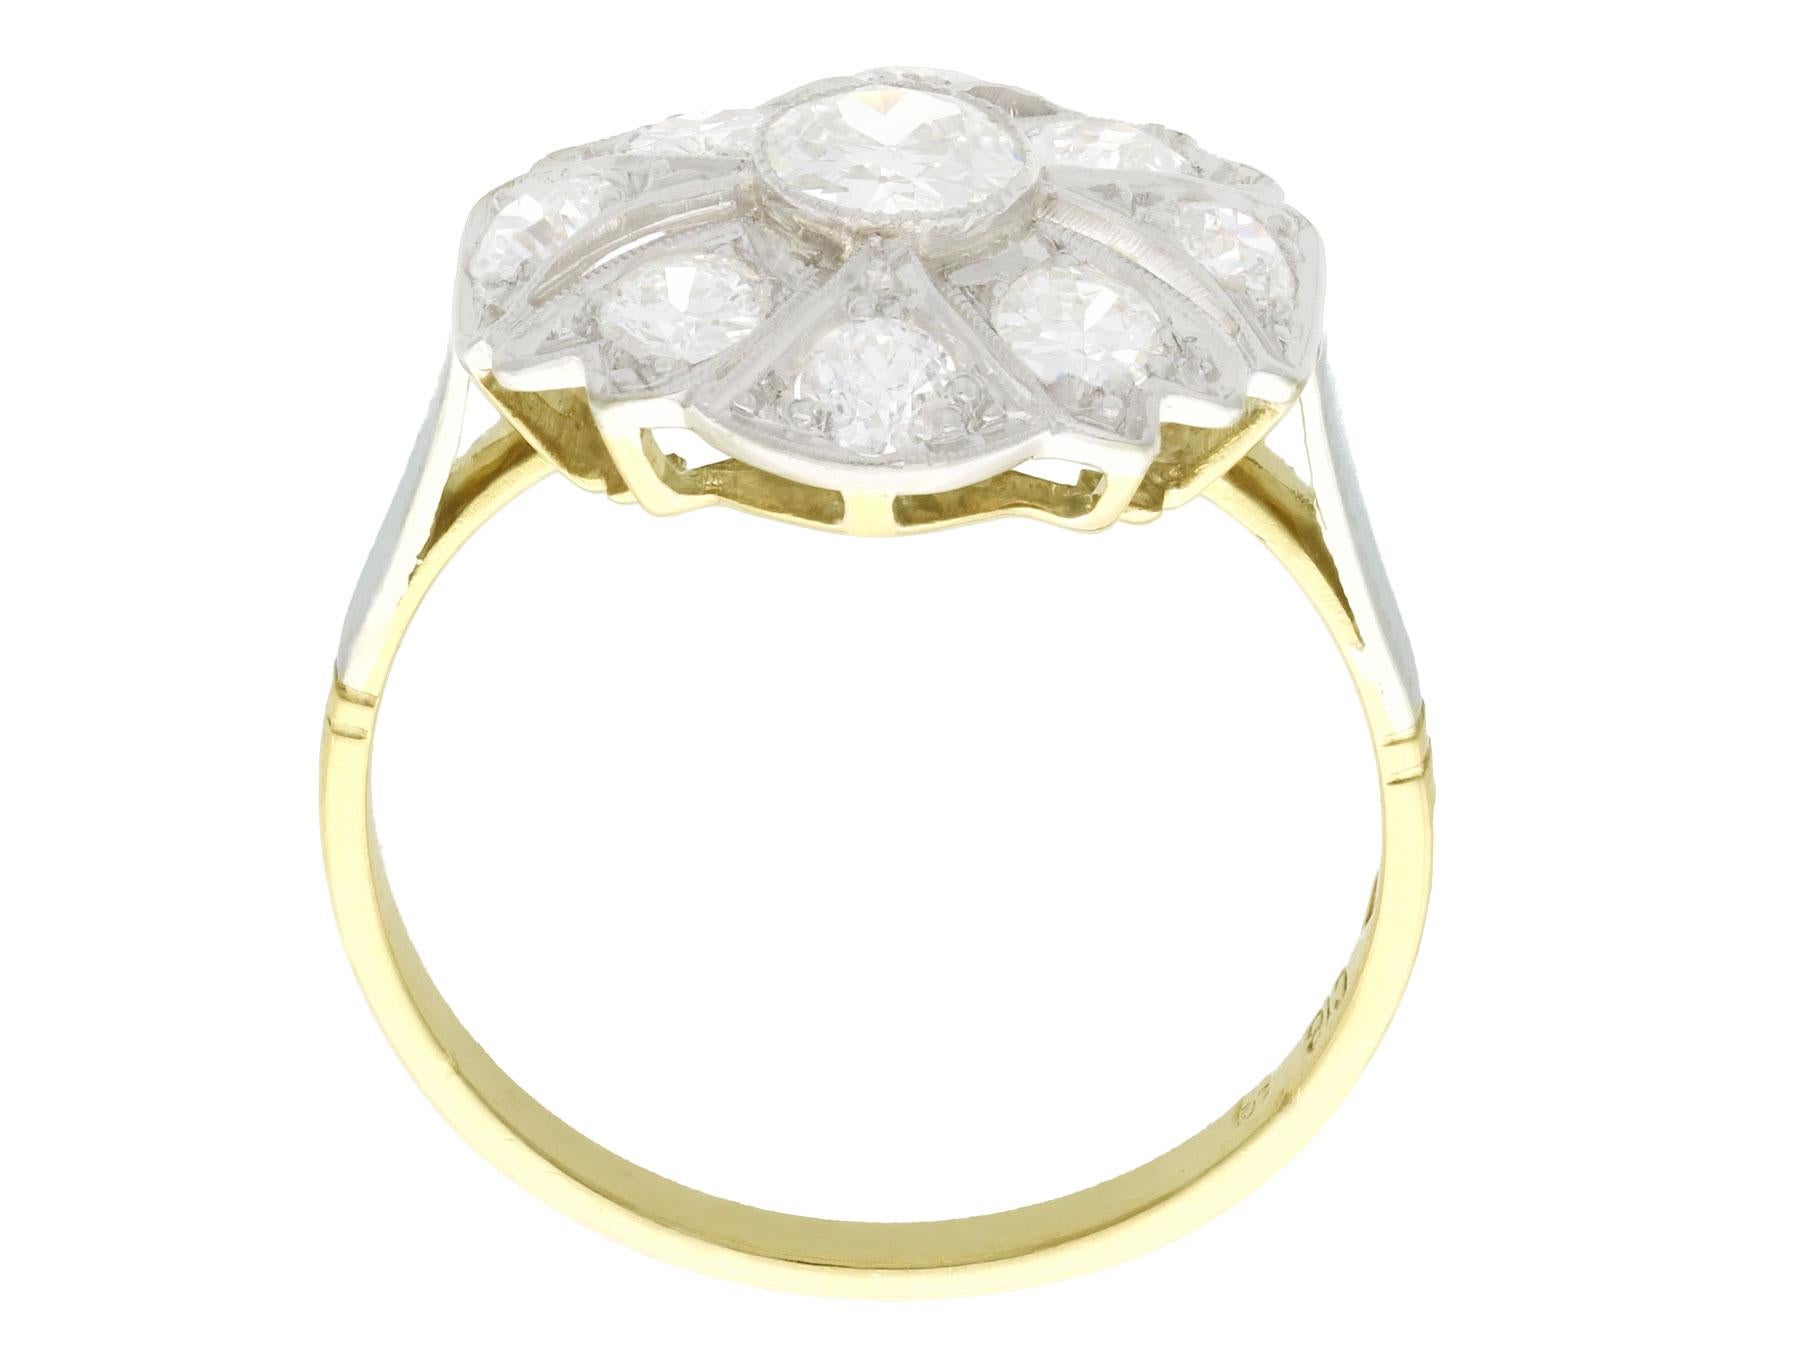 Women's Art Deco 1.42 Carat Diamond and Yellow Gold Cocktail Ring, Circa 1925 For Sale